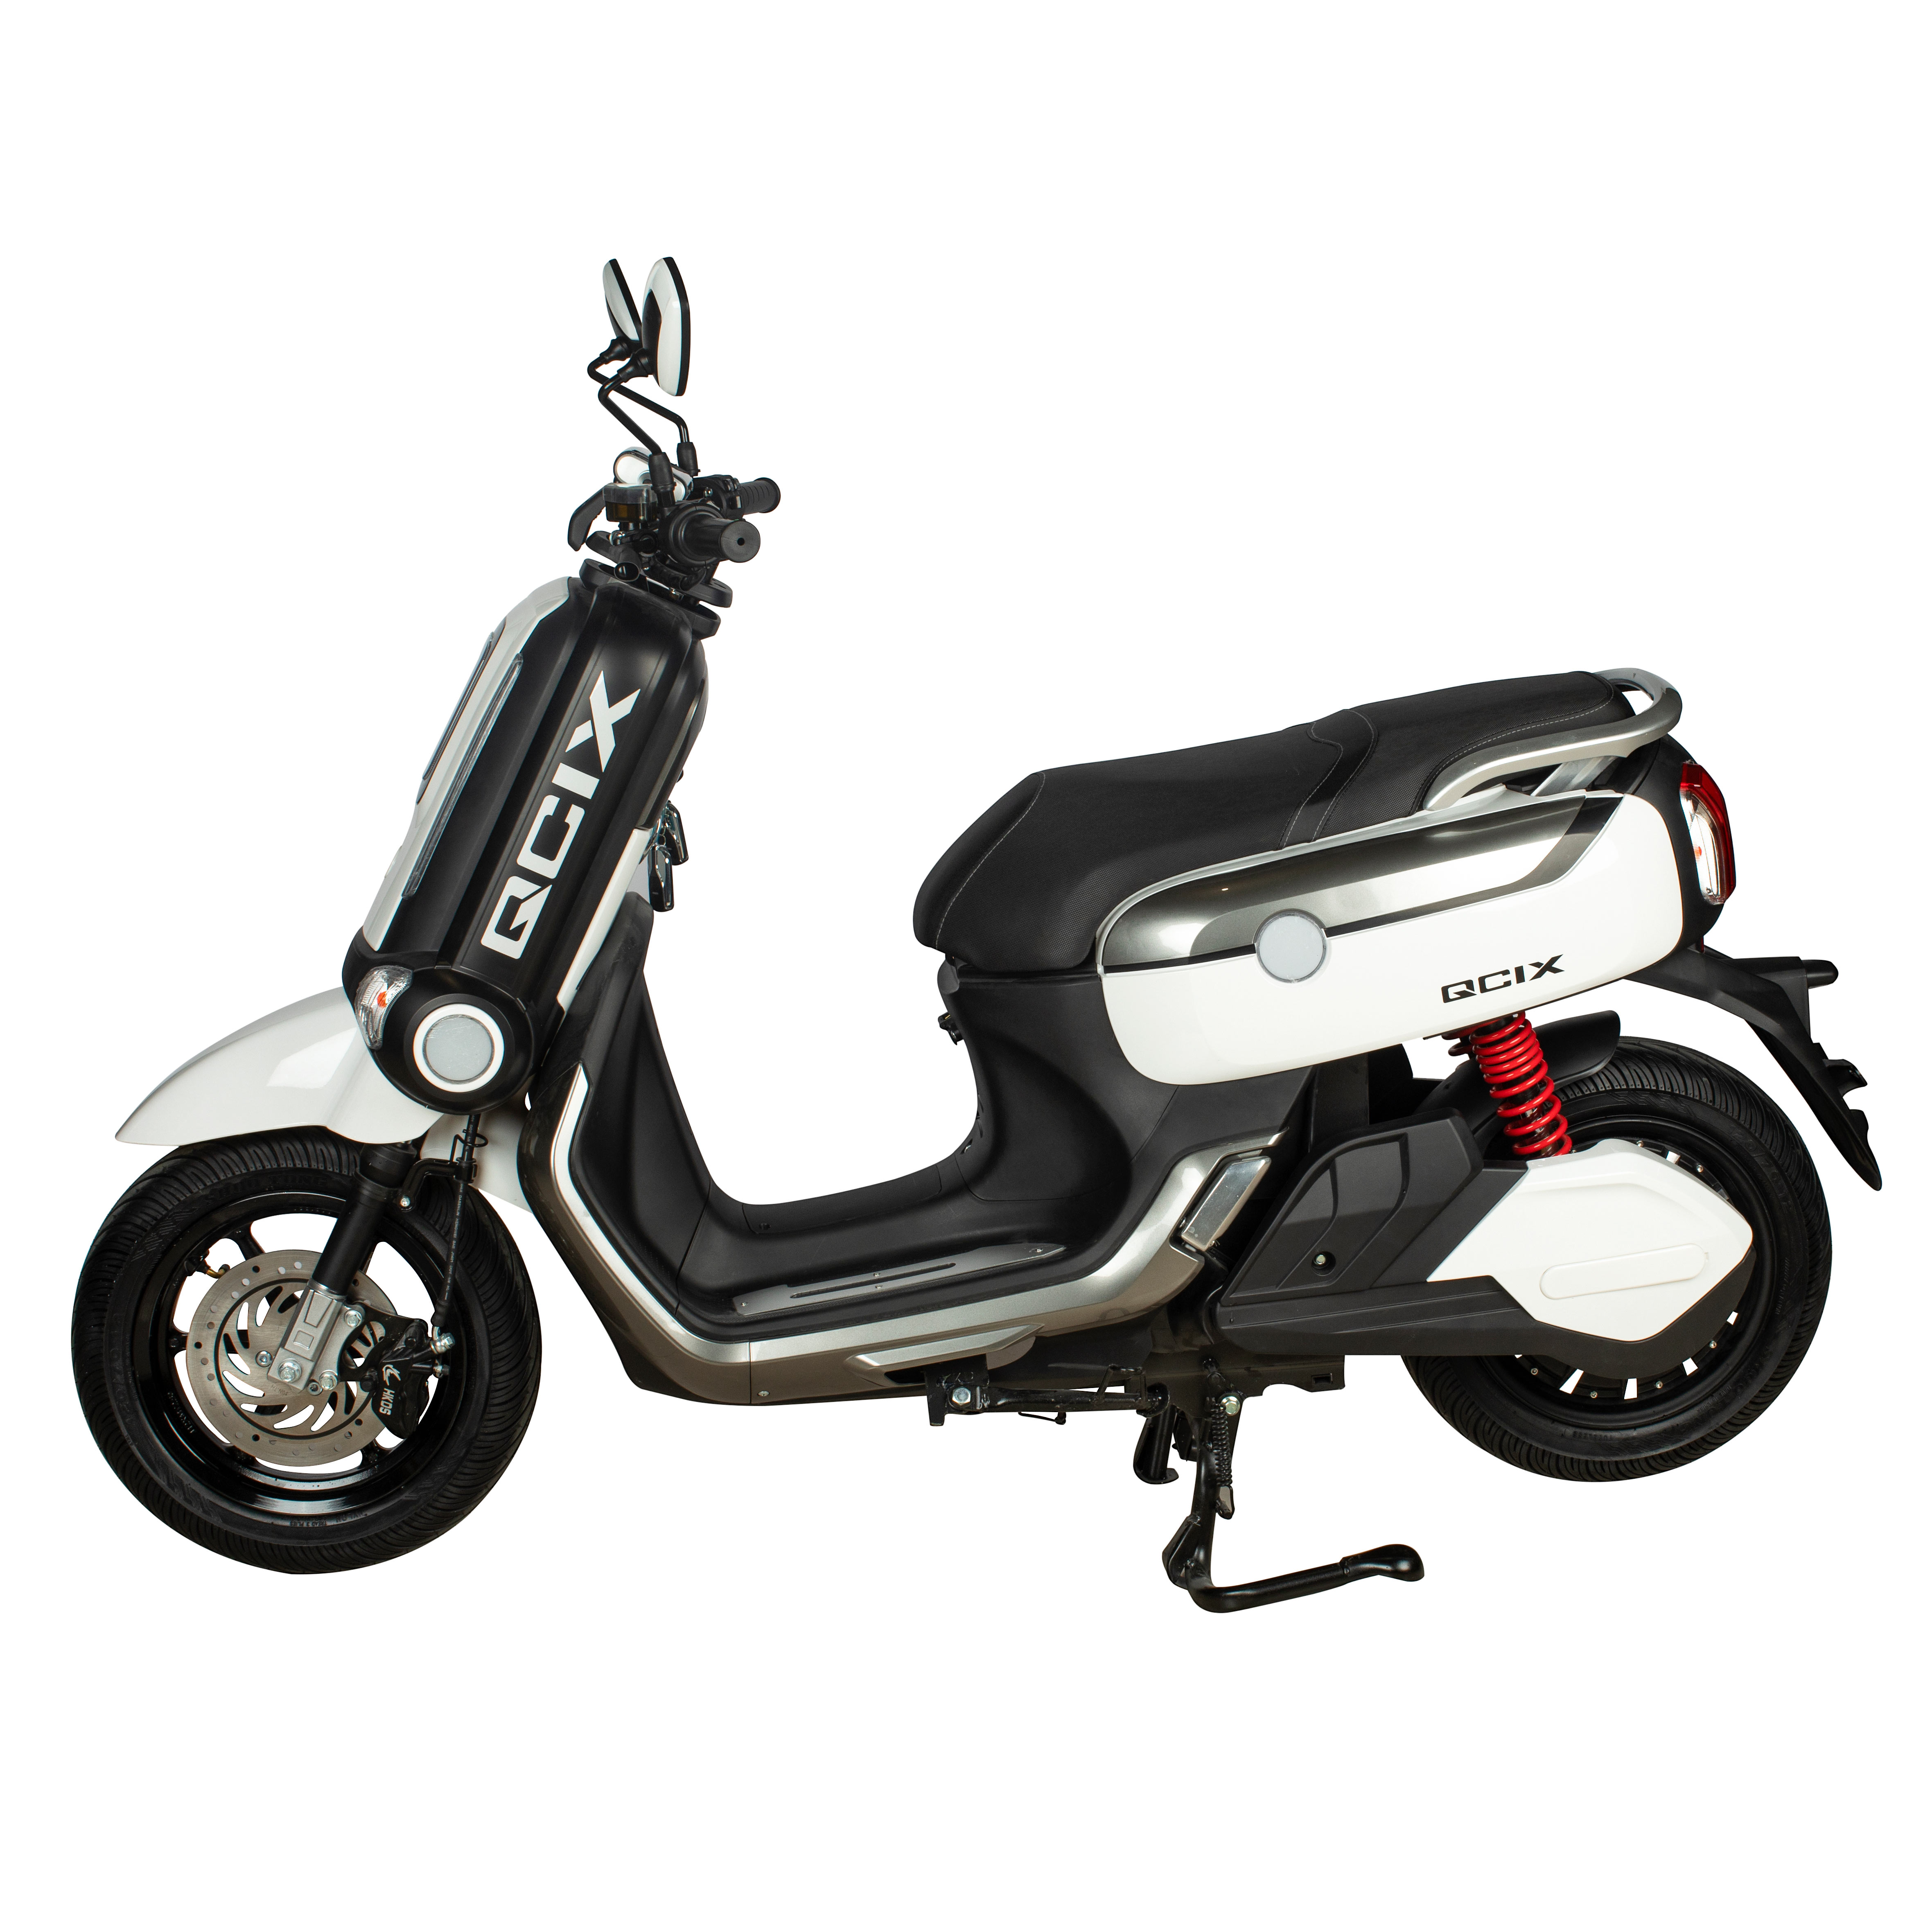 SPECIAL DESIGN 1200W POWERFUL TWO WHEEL ELECTRIC MOTRCYCLE SCOOTER (YM-1)